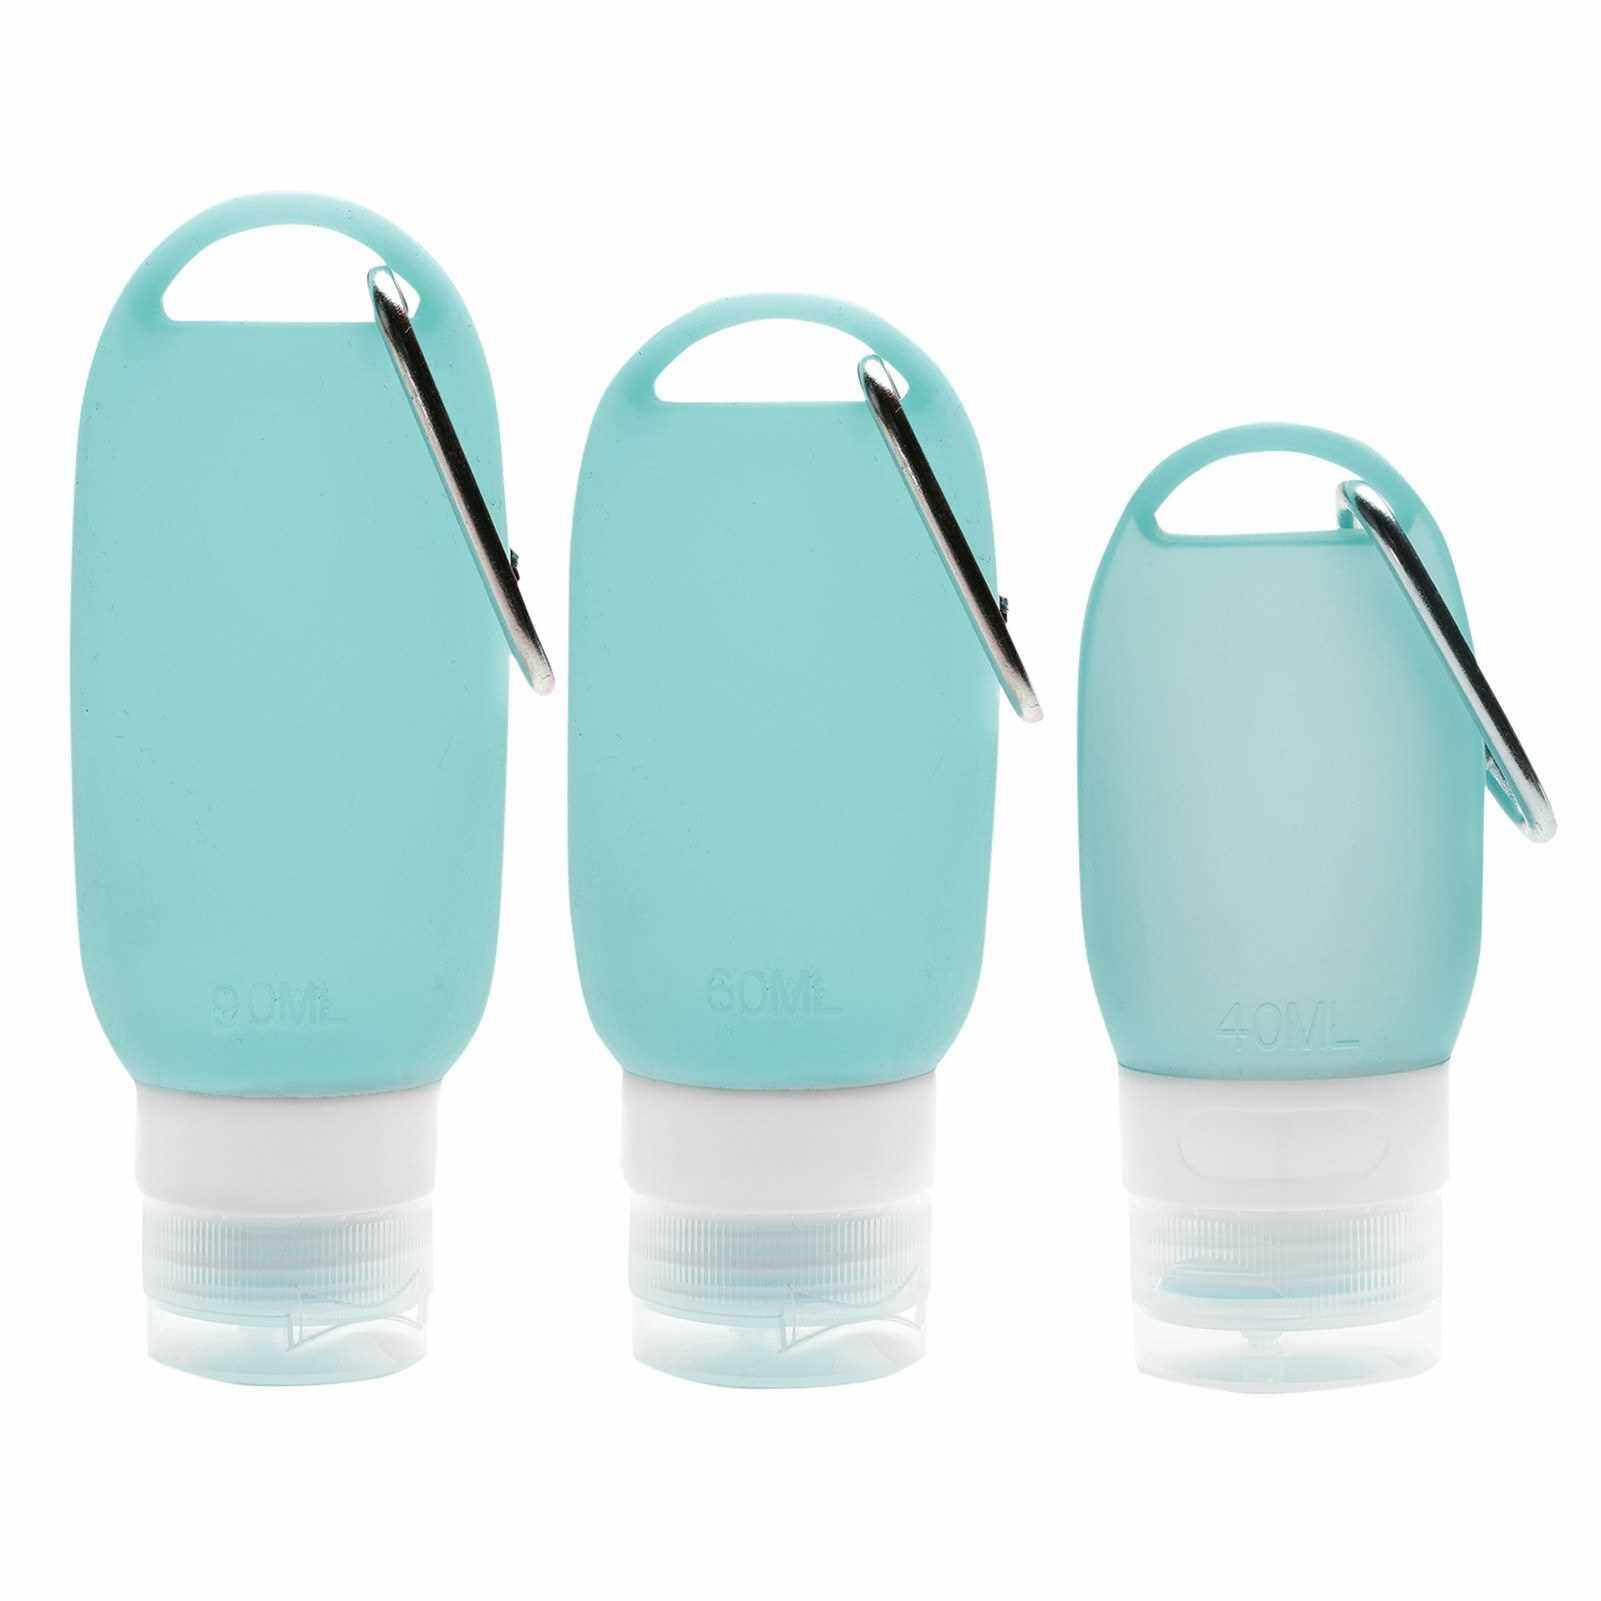 3PCS Travel Bottles with Snap Hook Hanging Soft Silicone Portable Refillable Empty Containers for Hand Sanitizer Shampoo Flip Cap School Work Outdoor (Turquoise)